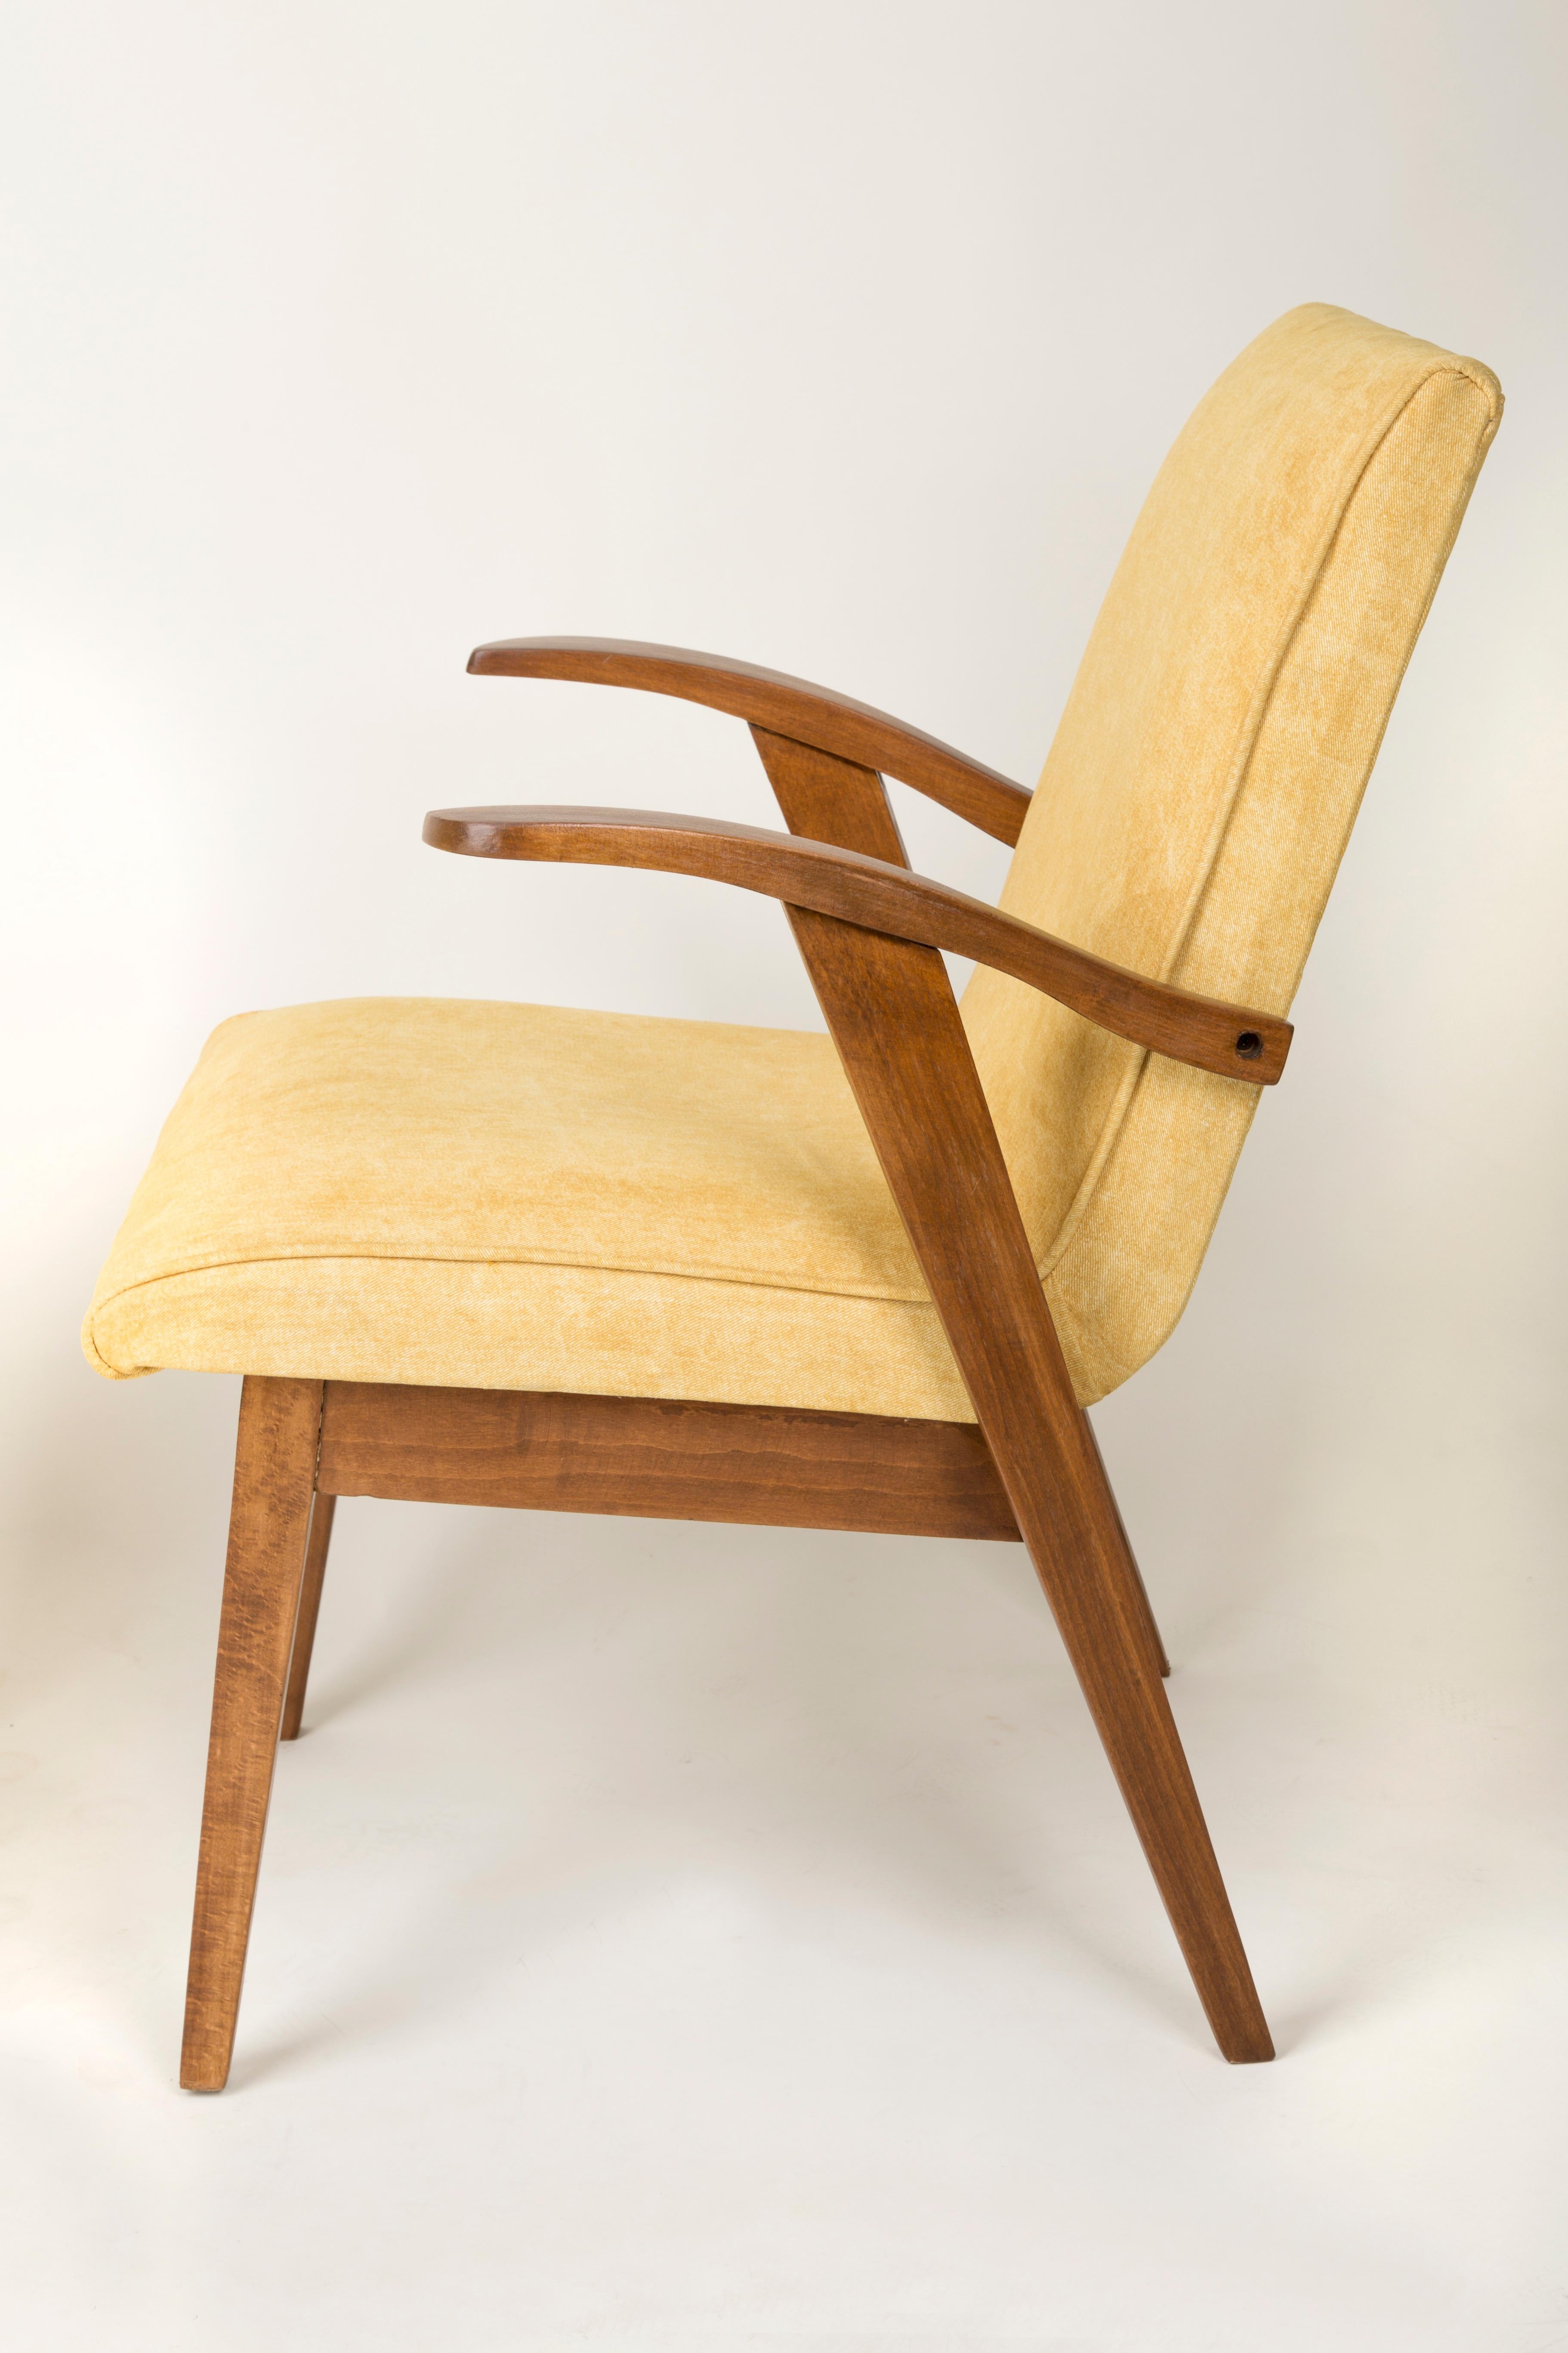 Polish Set of Two Vintage Yellow Chairs, 1960s For Sale